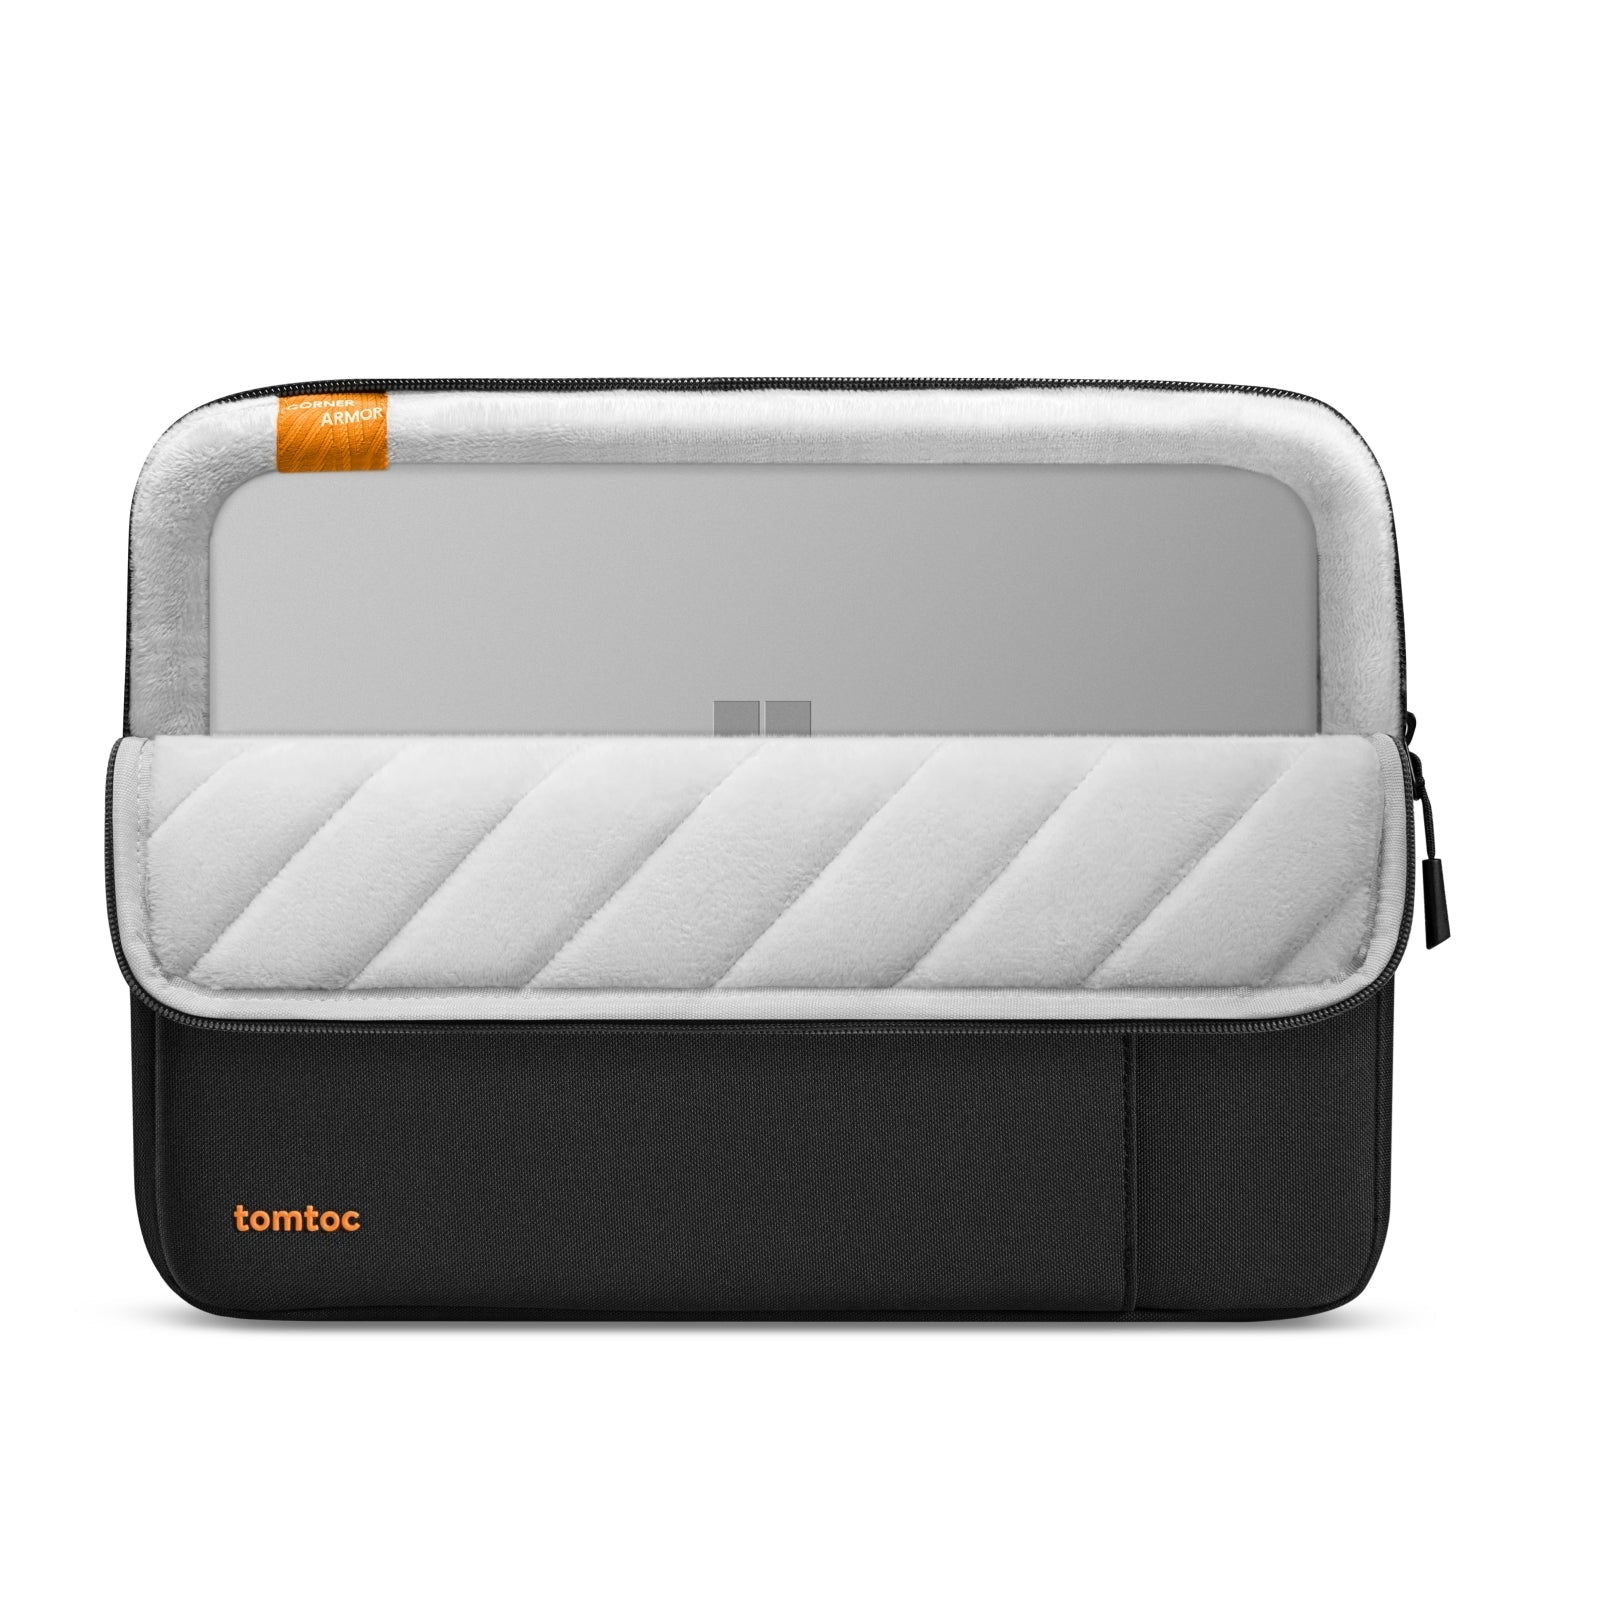 Defender-A13 Laptop Sleeve for 13-inch New Microsoft Surface Pro